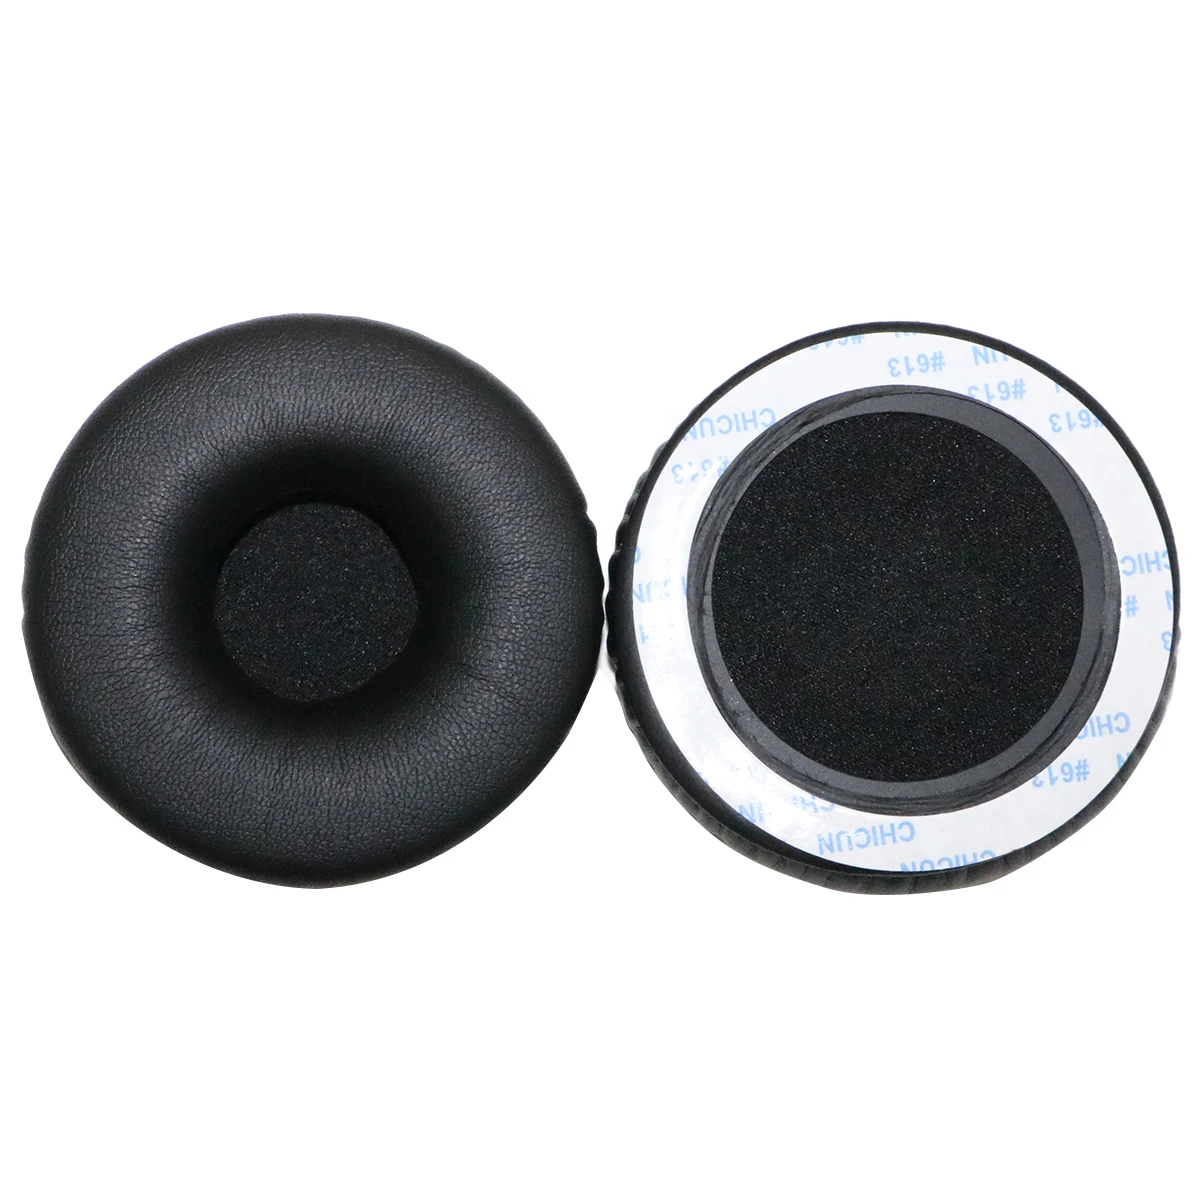 SOONHUA 1 Pair Replacement Ear Pads Cushion For Sony MDR-XB450 XB550 XB650 Headphone